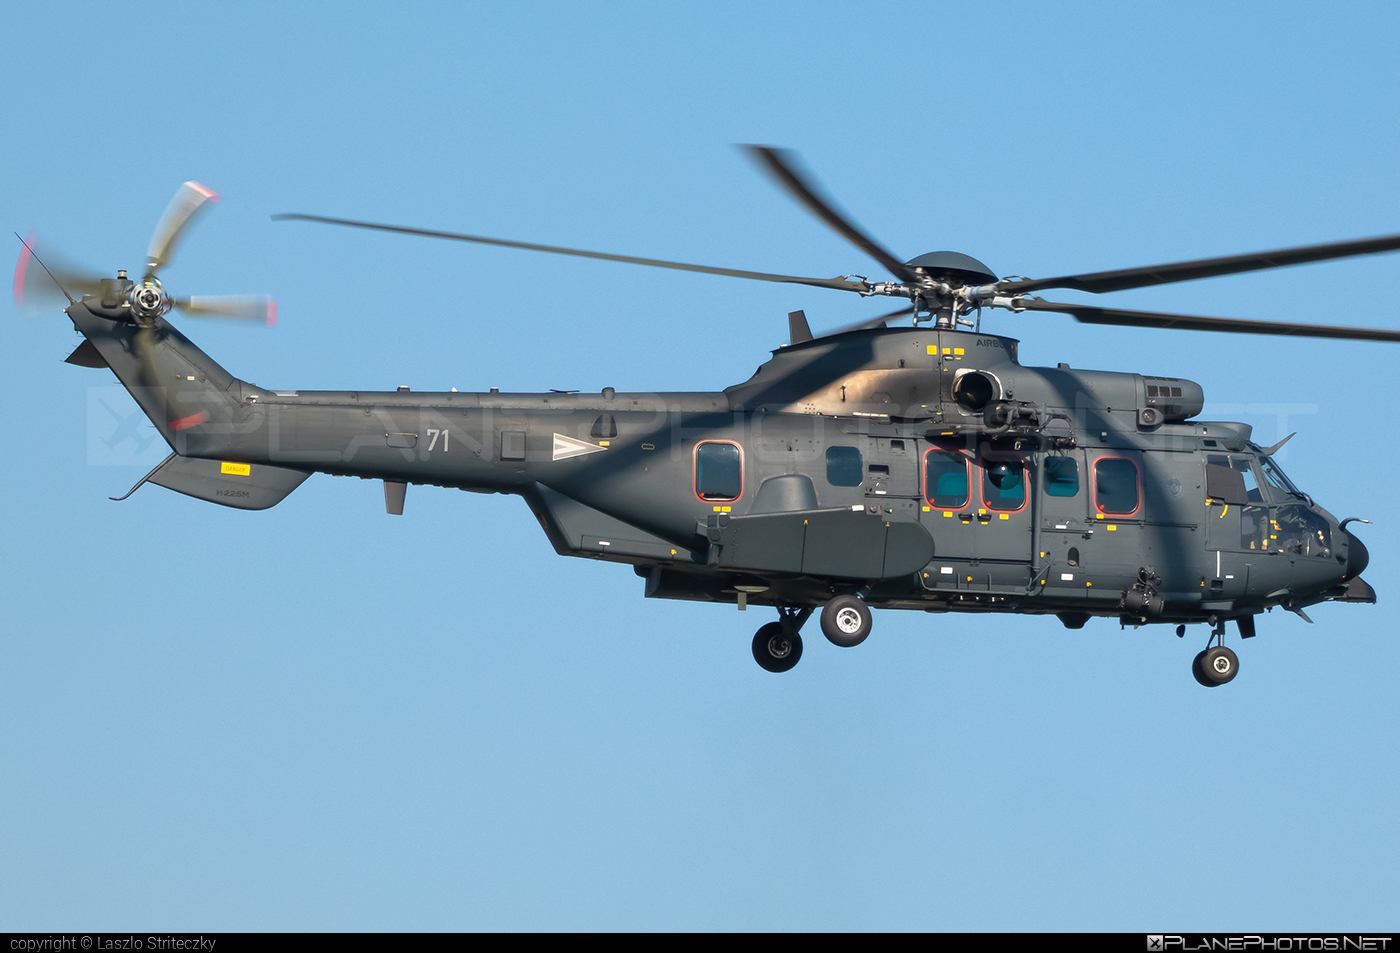 Airbus Helicopters H225M Super Puma - 71 operated by Magyar Légierő (Hungarian Air Force) #H225M #SuperPuma #airbushelicopters #hungarianairforce #magyarlegiero